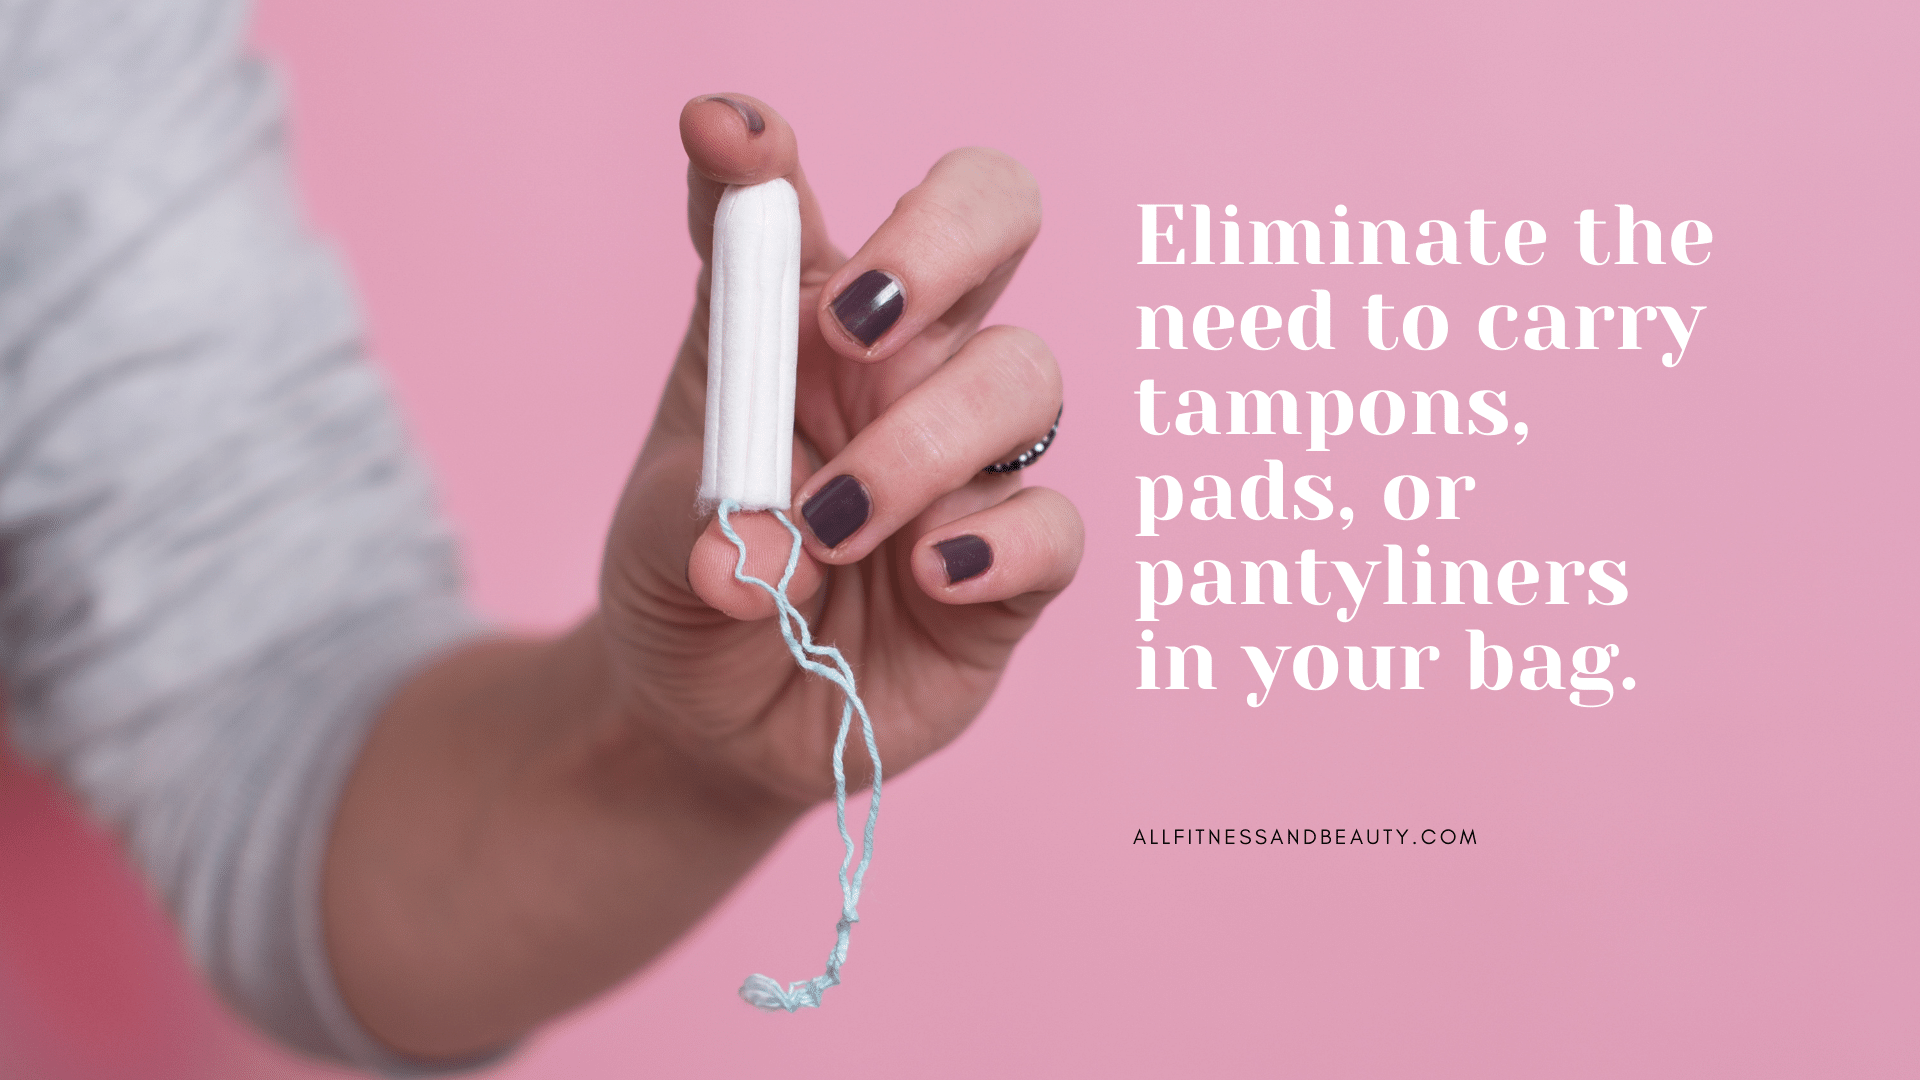 period panties eliminate the need of tampons